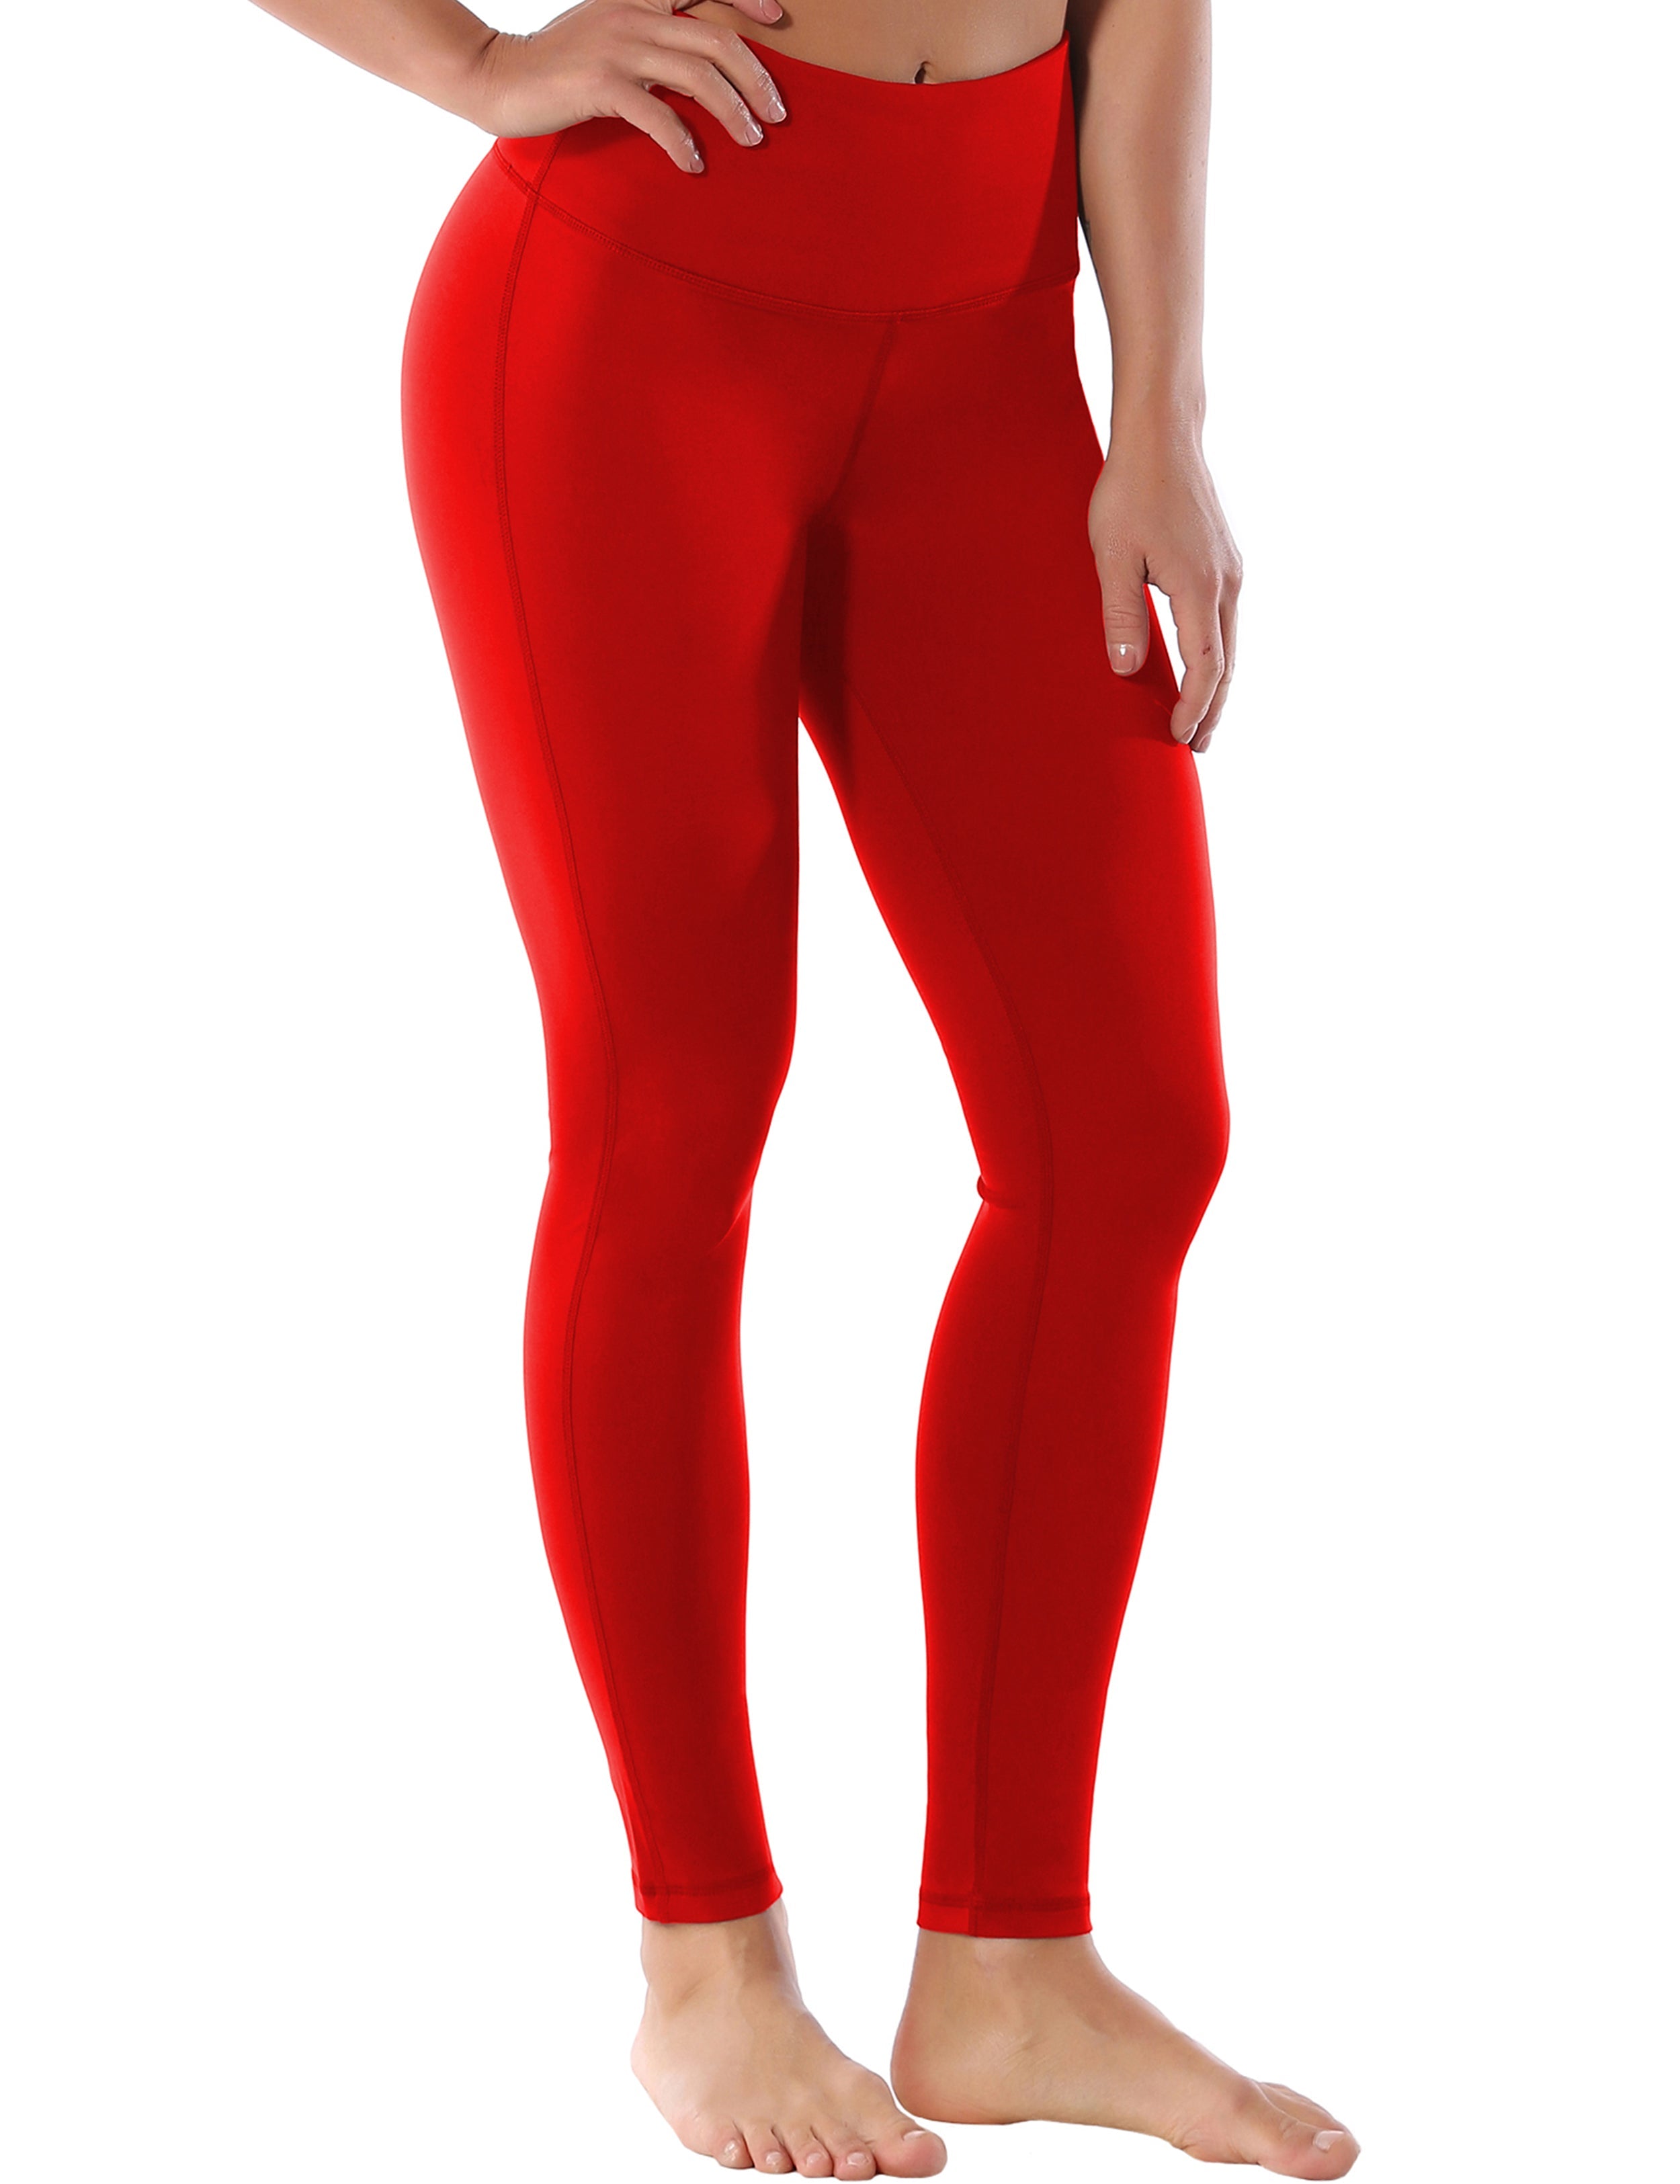 High Waist Side Line Golf Pants scarlet Side Line is Make Your Legs Look Longer and Thinner 75%Nylon/25%Spandex Fabric doesn't attract lint easily 4-way stretch No see-through Moisture-wicking Tummy control Inner pocket Two lengths